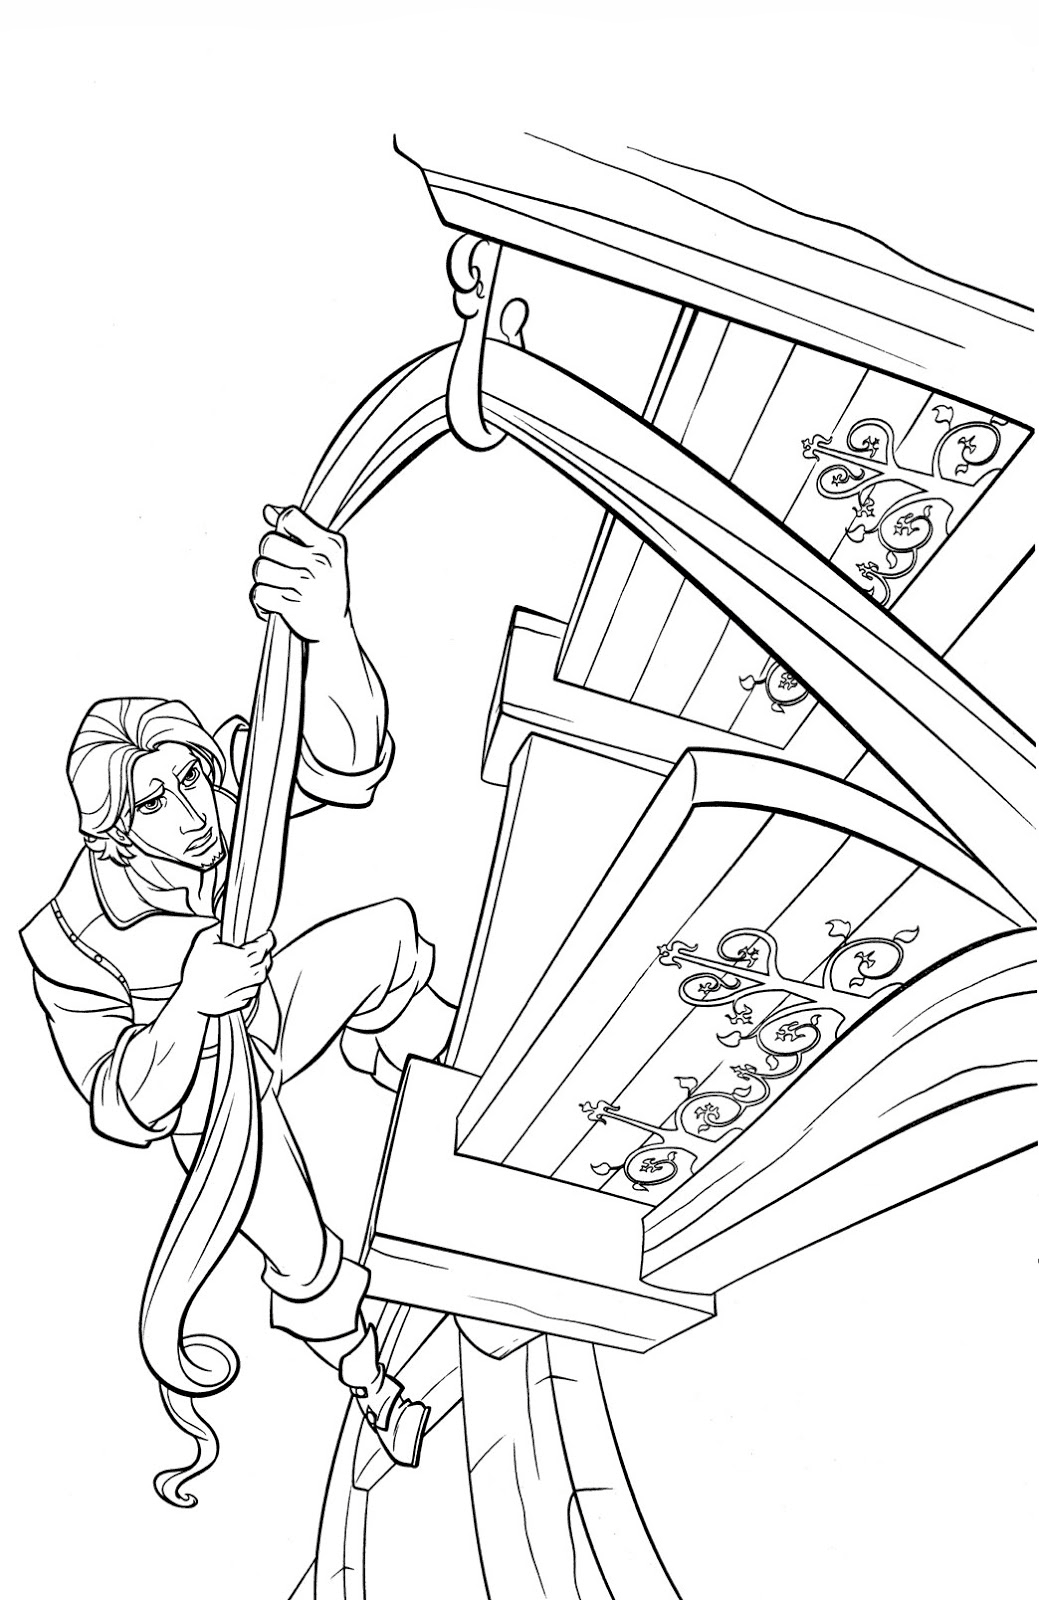 Flynn climbs the tower Coloring Page